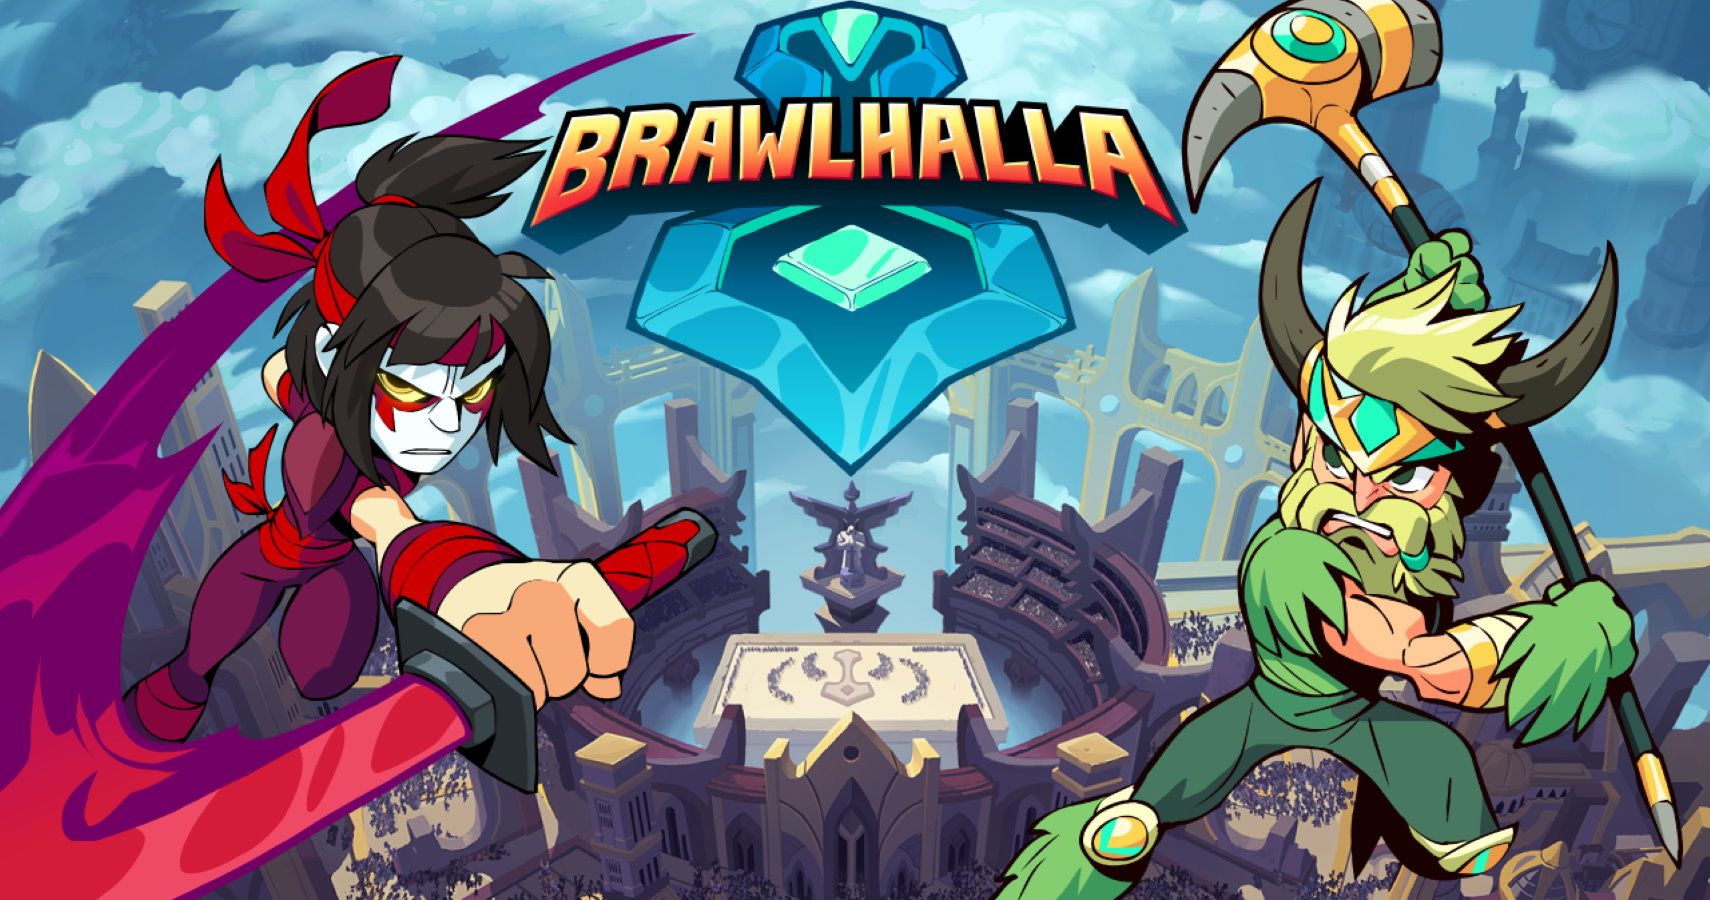 Brawlhalla Is Coming To Mobile With Console/PC CrossPlay